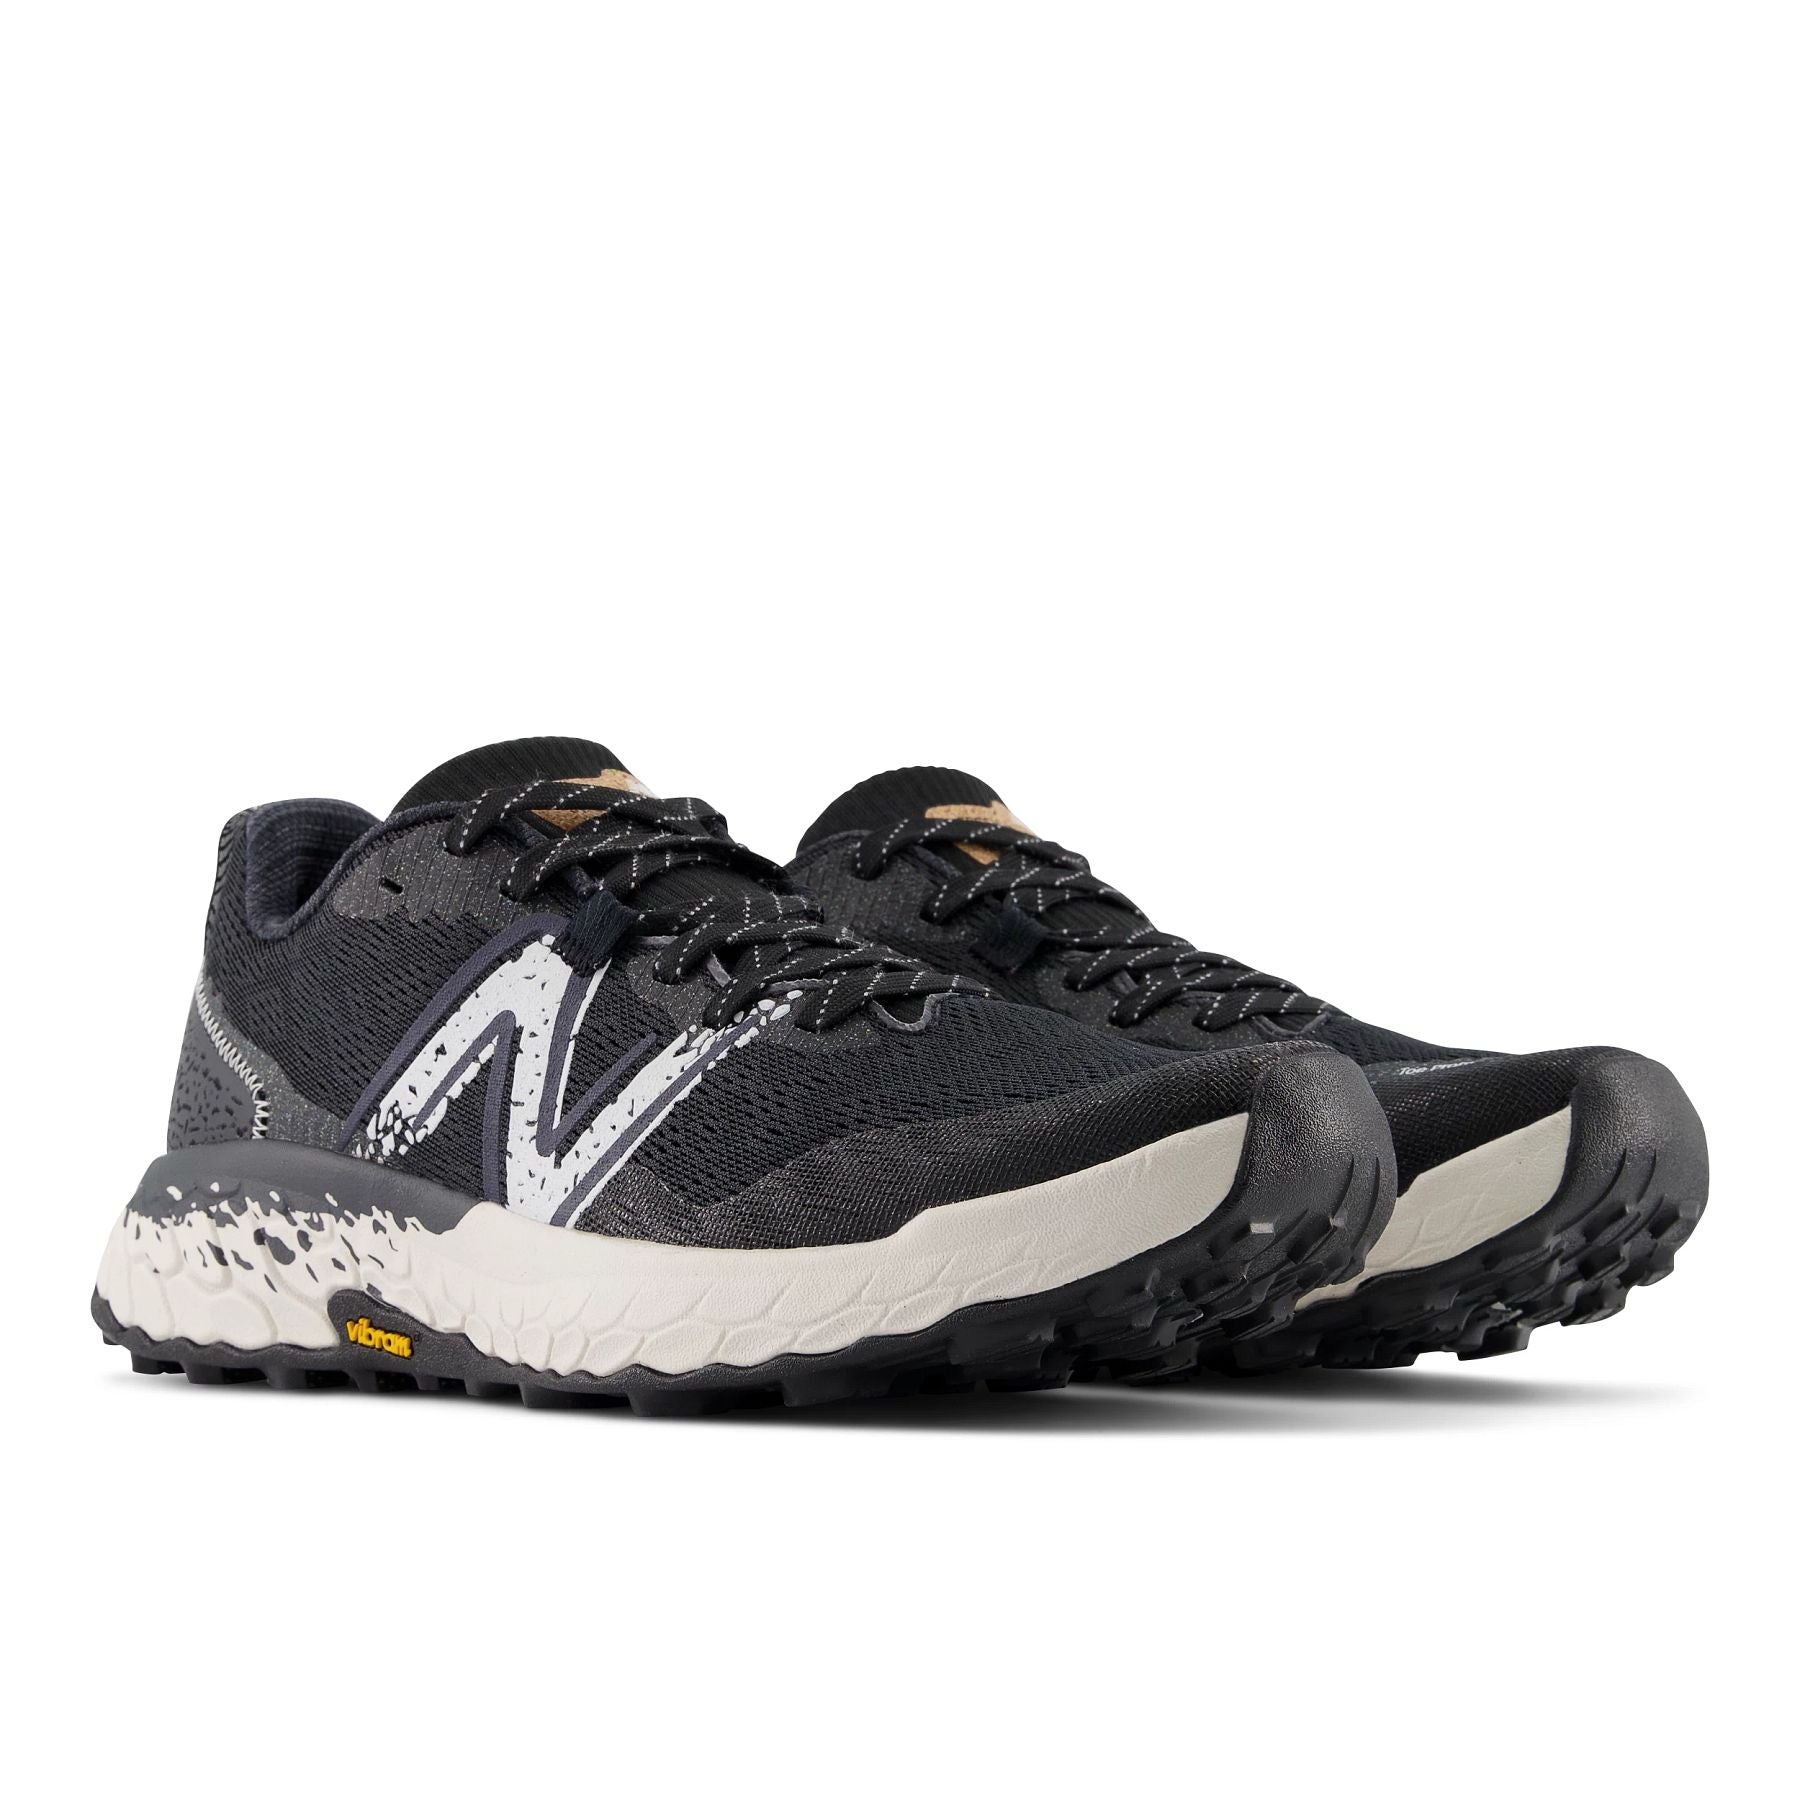 Front angle view of the Men's Hierro V7 trail shoe by New Balance in the color Black/Reflection